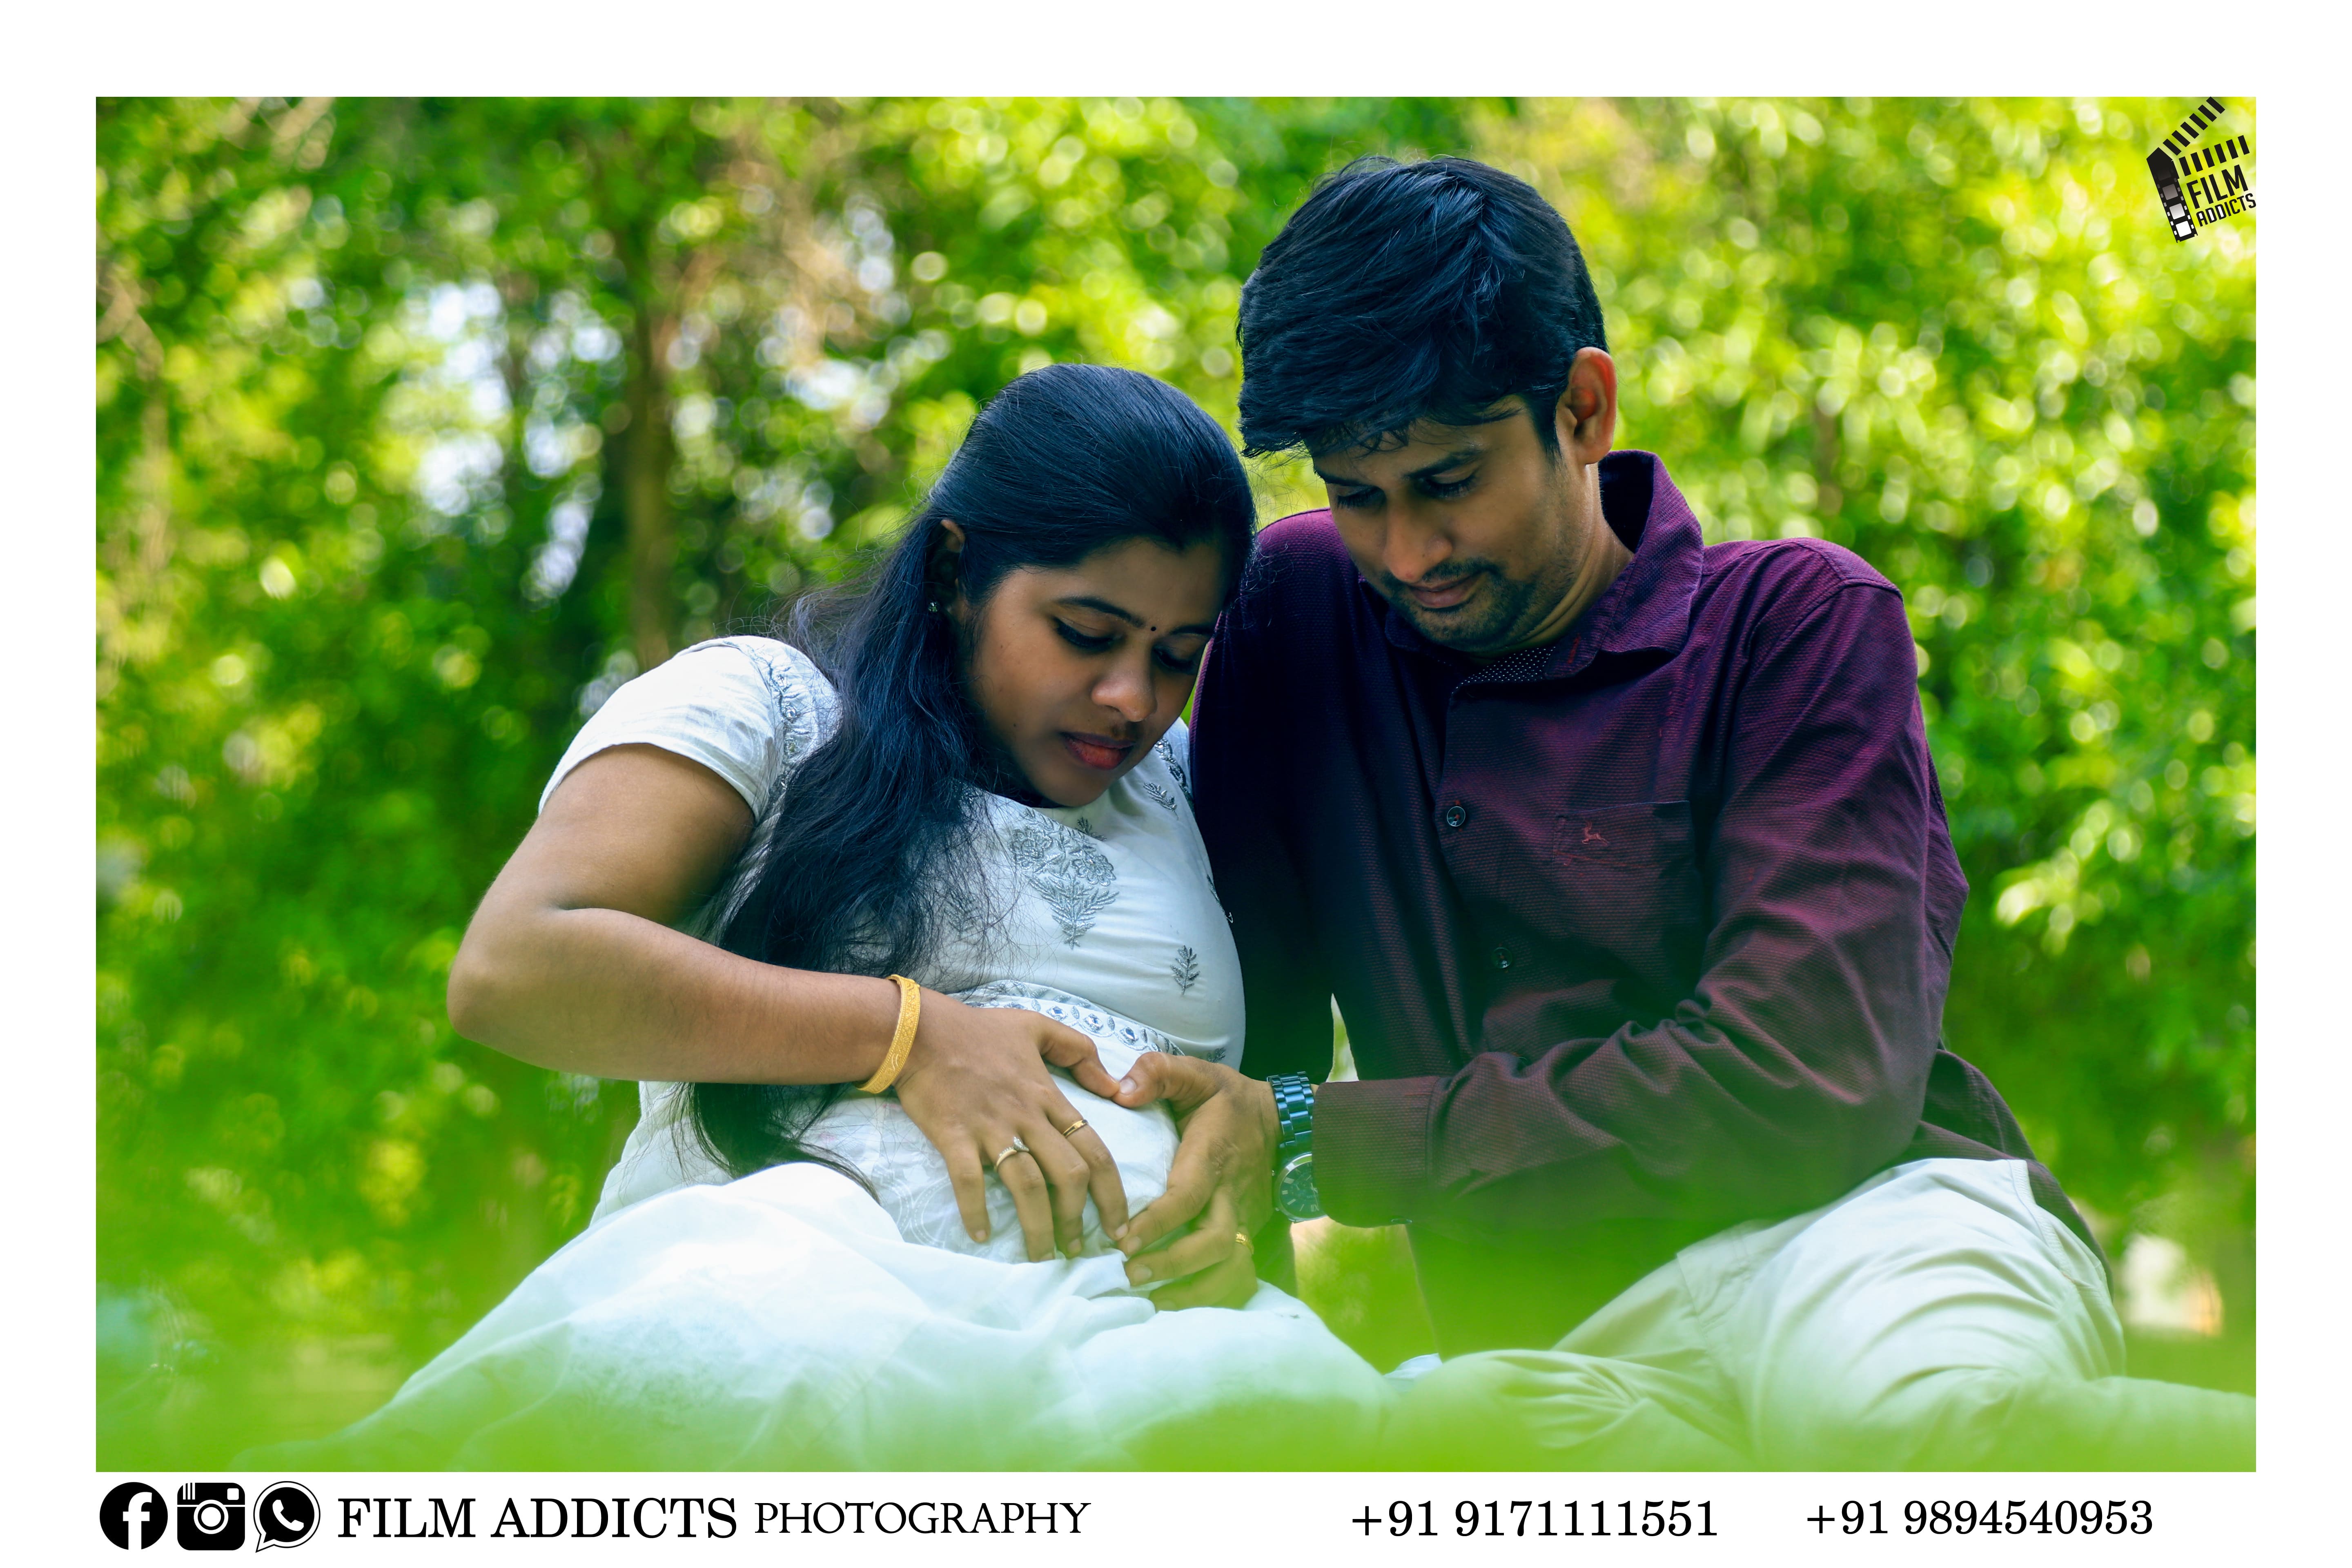 Best Maternity Photographers in Sivagangai, best Maternity photographers in Sivaganga, Best Baby Shower Photographers in Sivagangai, best Baby Shower photographers in Sivaganga,best Baby Shower photography in Sivagangai,best candid photographers in Sivagangai,best candid photography in Sivagangai,best marriage photographers in Sivagangai,best marriage photography in Sivagangai,best photographers in Sivagangai,best photography in Sivagangai,best Baby Shower candid photography in Sivagangai,best Baby Shower candid photographers in Sivagangai,best Baby Shower video in Sivagangai,best Baby Shower videographers in Sivagangai,best Baby Shower videography in Sivagangai,best candid videographers in Sivagangai,best candid videography in Sivagangai,best marriage videographers in Sivagangai,best marriage videography in Sivagangai,best videographers in Sivagangai,best videography in Sivagangai,best Baby Shower candid videography in Sivagangai,best Baby Shower candid videographers in Sivagangai,best helicam operators in Sivagangai,best drone operators in Sivagangai,best Baby Shower studio in Sivagangai,best professional photographers in Sivagangai,best professional photography in Sivagangai,No.1 Baby Shower photographers in Sivagangai,No.1 Baby Shower photography in Sivagangai,Sivagangai Baby Shower photographers,Sivagangai Baby Shower photography,Sivagangai Baby Shower videos,best candid videos in Sivagangai,best candid photos in Sivagangai,best helicam operators photography in Sivagangai,best helicam operator photographers in Sivagangai,best outdoor videography in Sivagangai,best professional Baby Shower photography in Sivagangai,best outdoor photography in Sivagangai,best outdoor photographers in Sivagangai,best drone operators photographers in Sivagangai,best Baby Shower candid videography in Sivagangai, tamilnadu Baby Shower photography, tamilnadu.